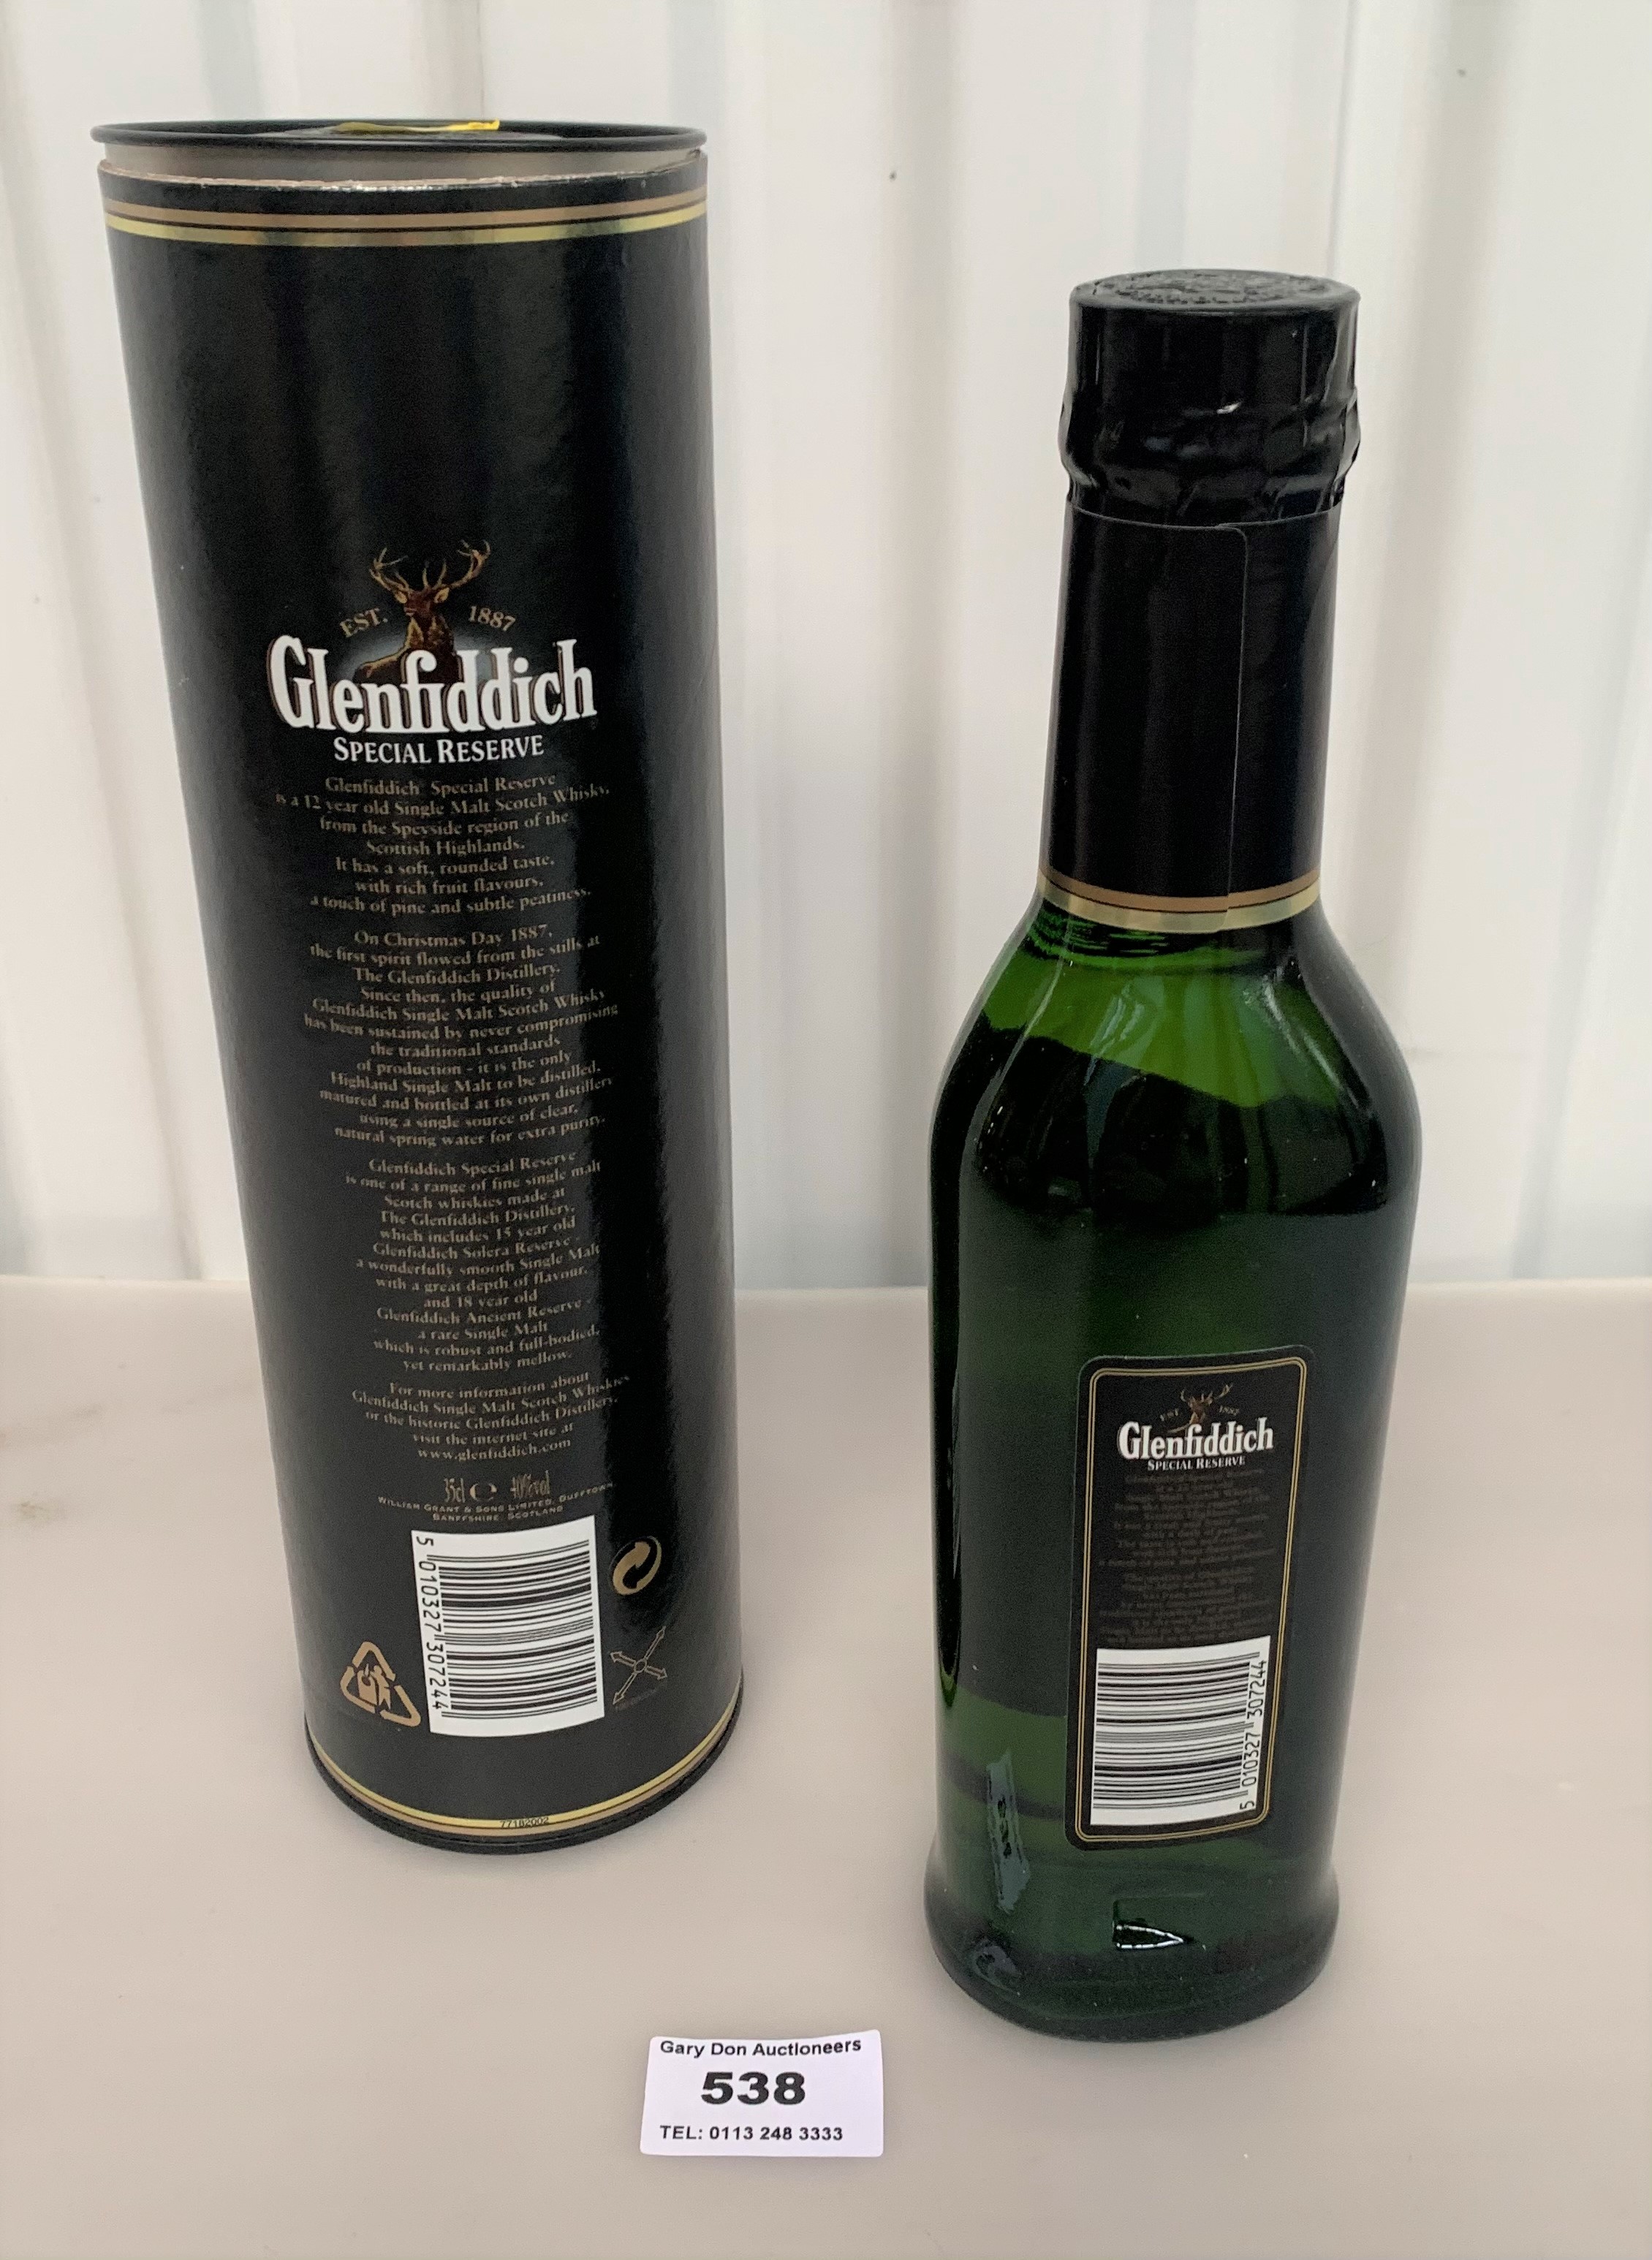 Boxed Glenfiddich Special Reserve Single Malt Scotch Whisky, aged 12 years, 35 cl - Image 2 of 2